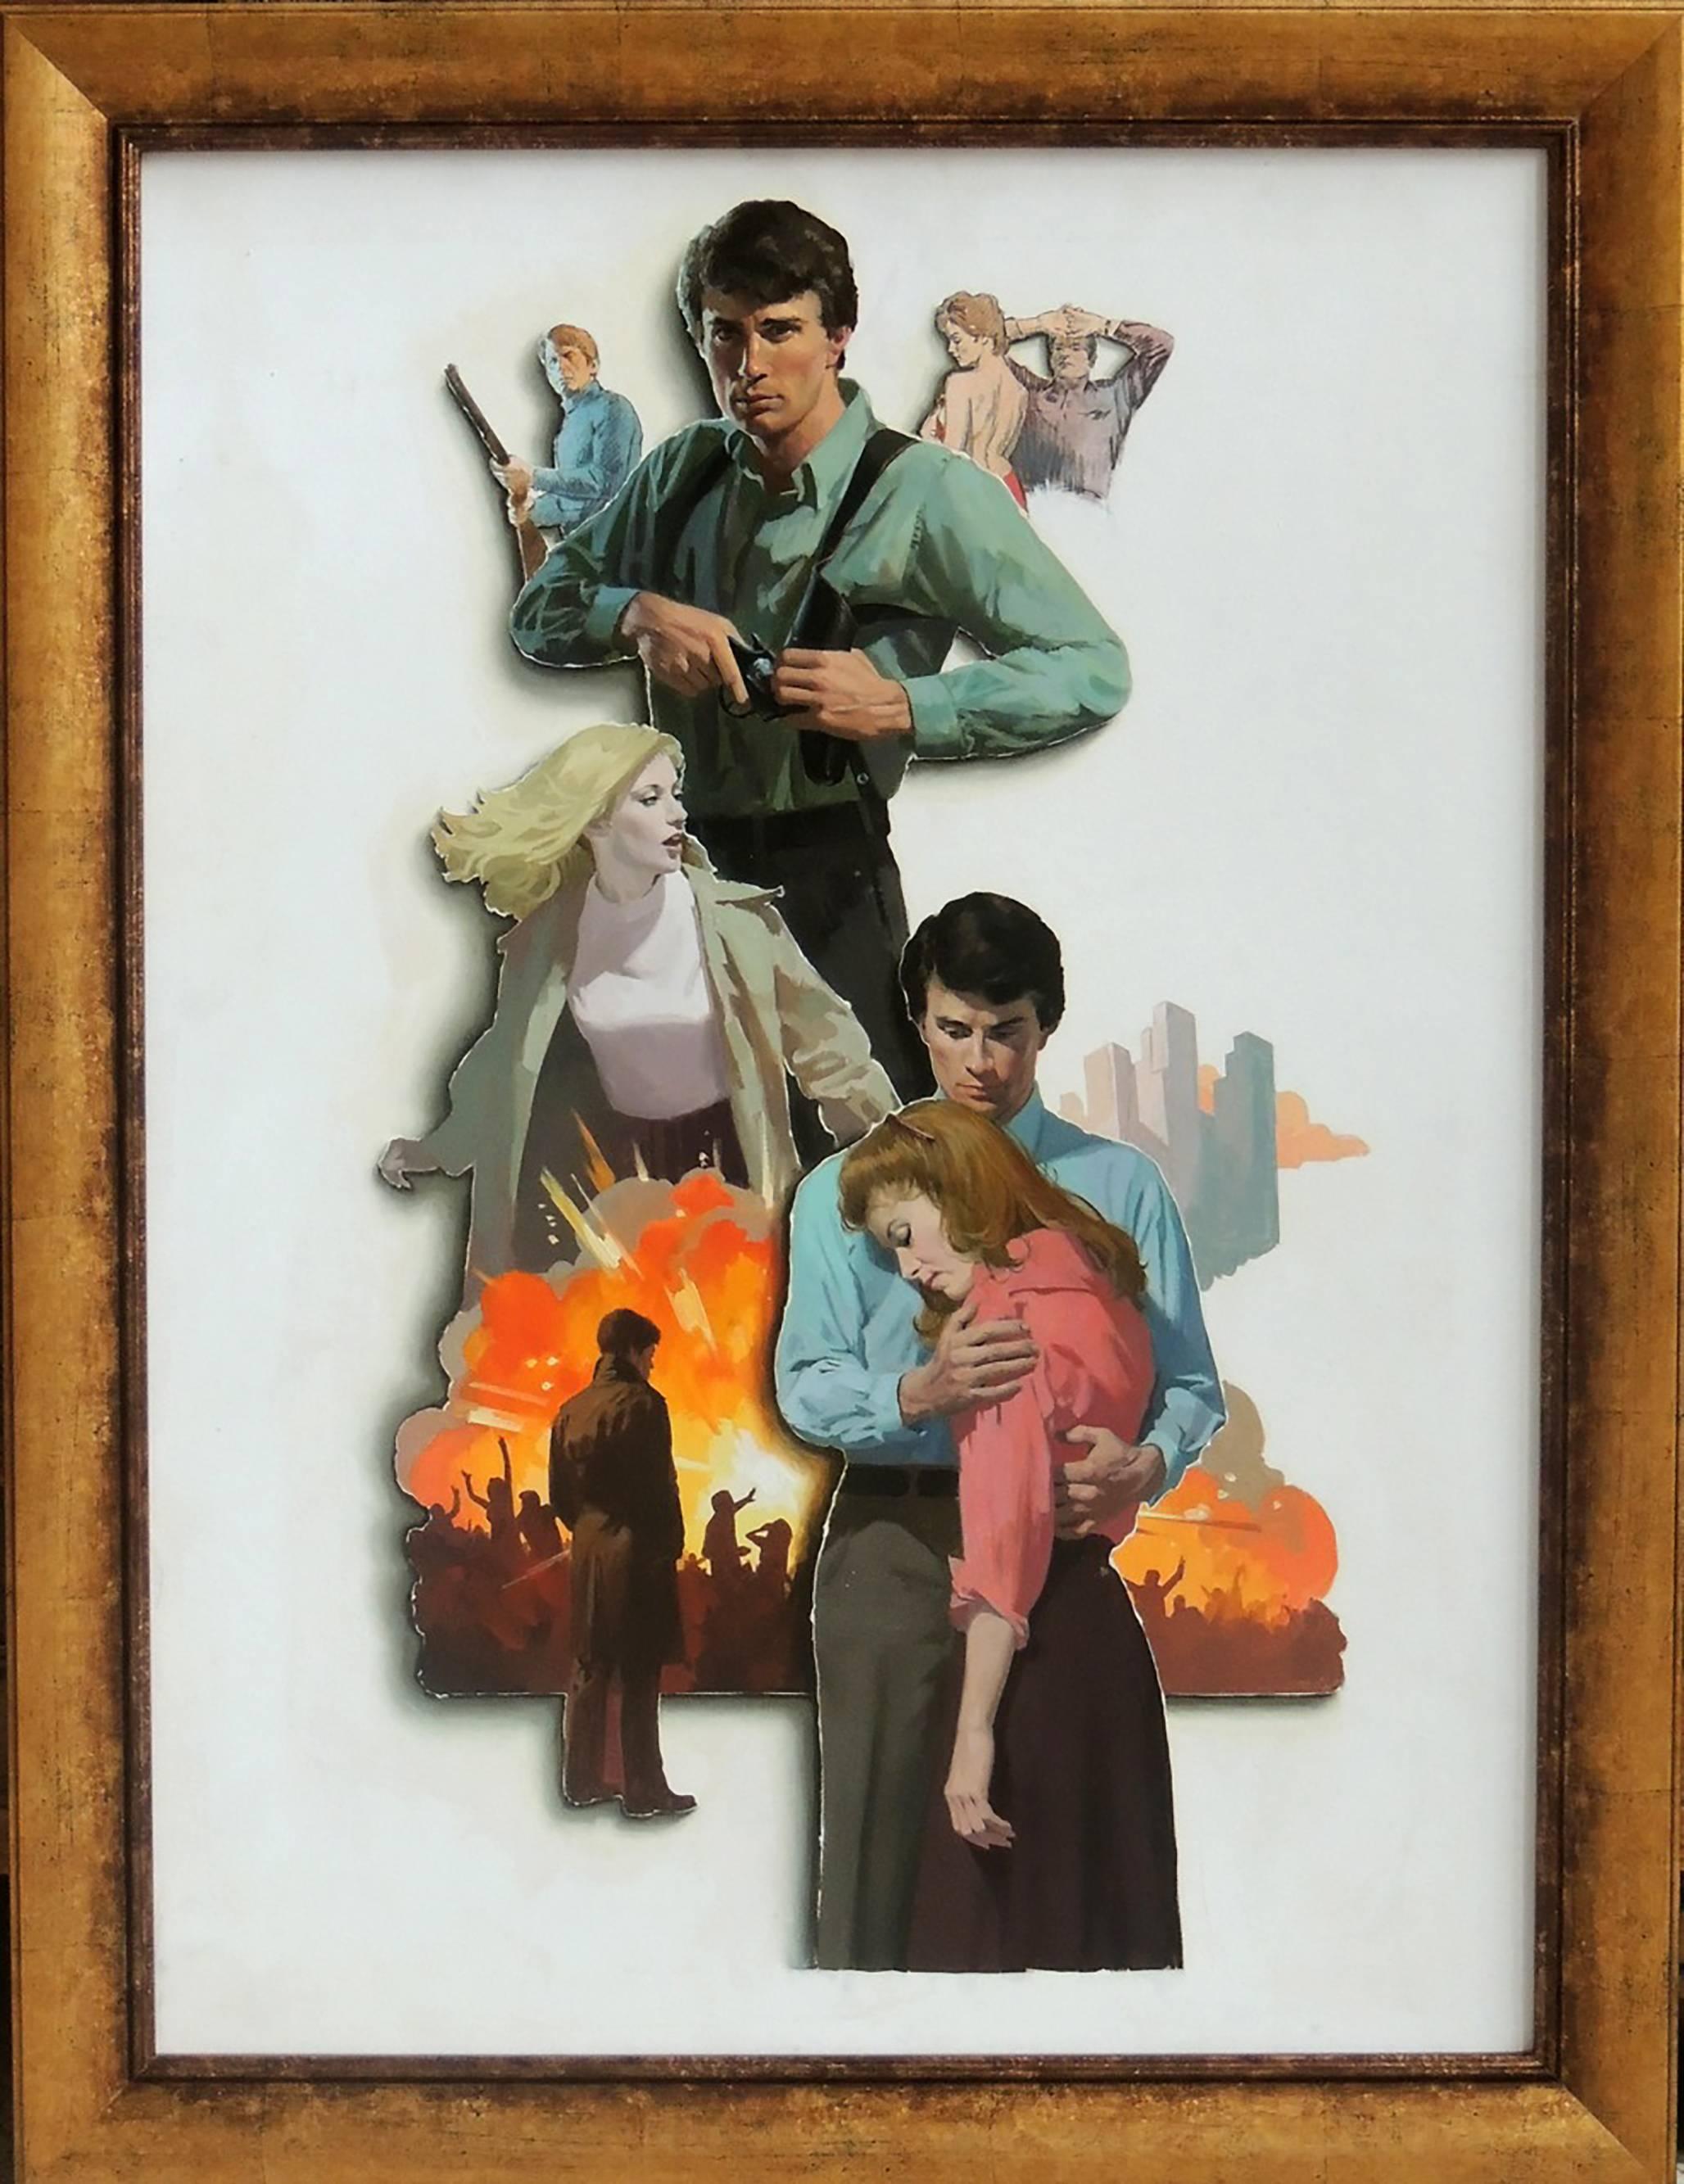 The Mission and the Aftermath, Romance Paperback Cover - Painting by Robert Maguire